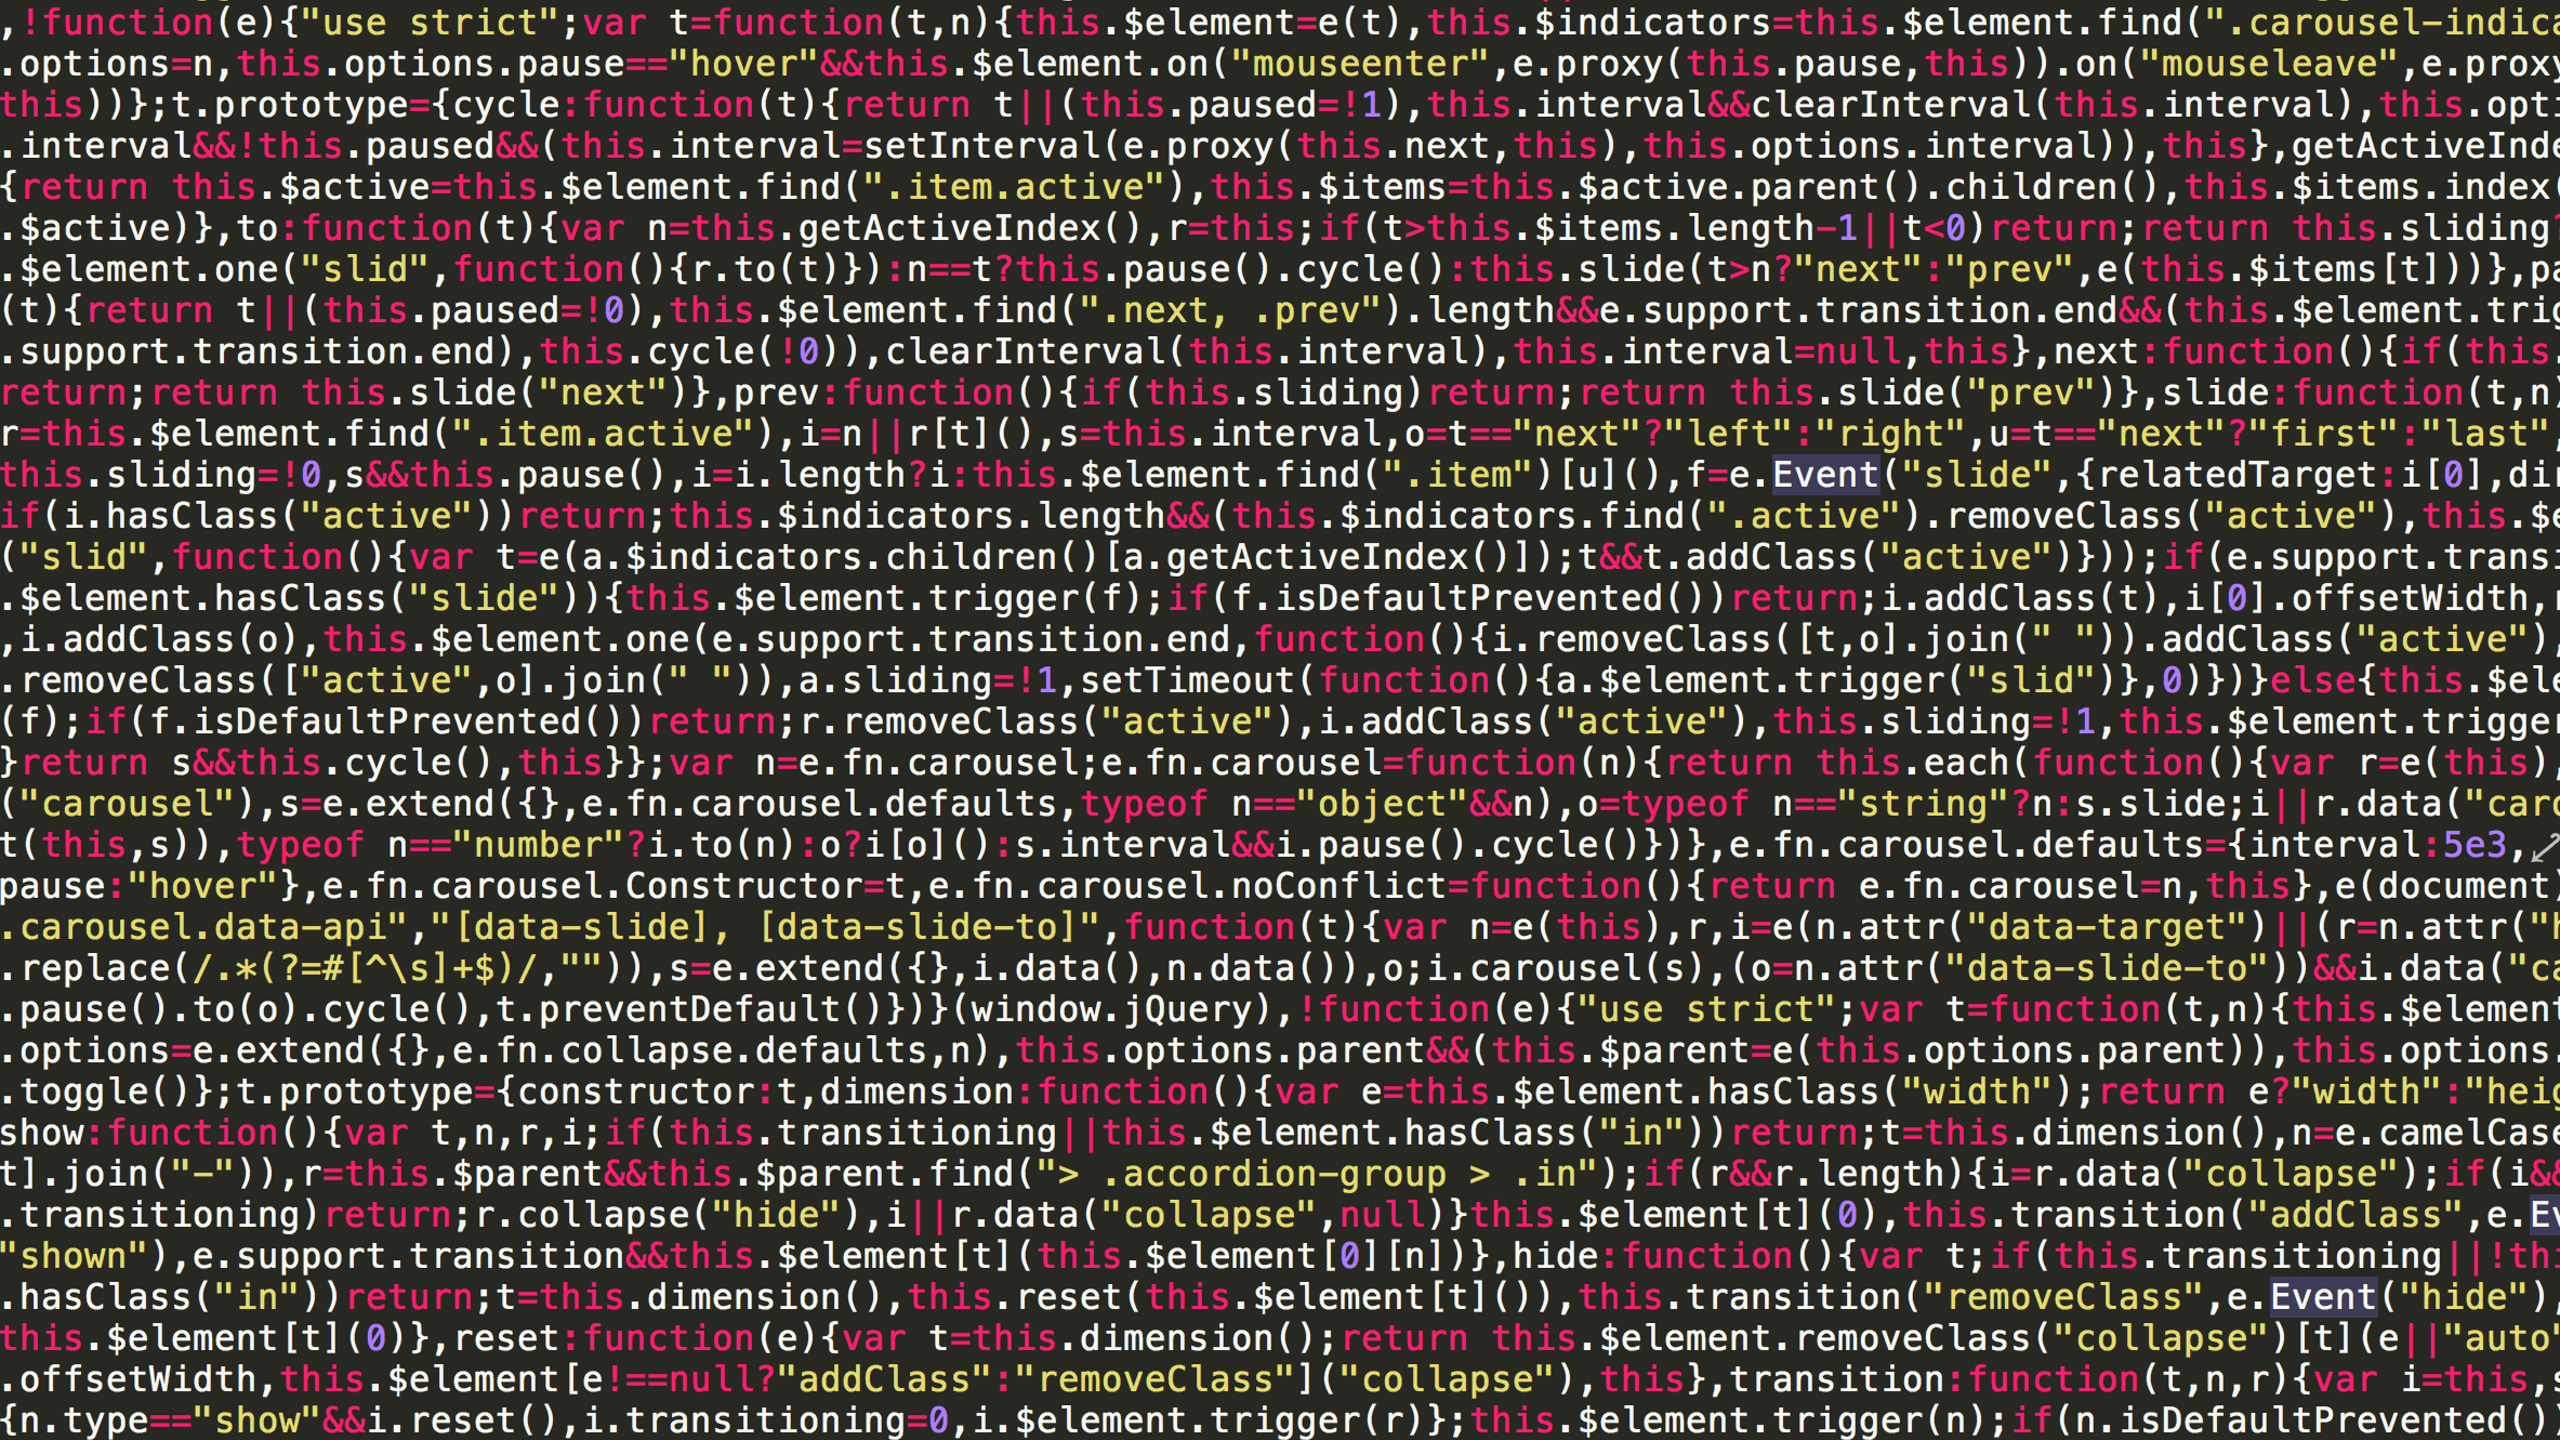 2560x1440] Programming  Linkedin background, Coding quotes